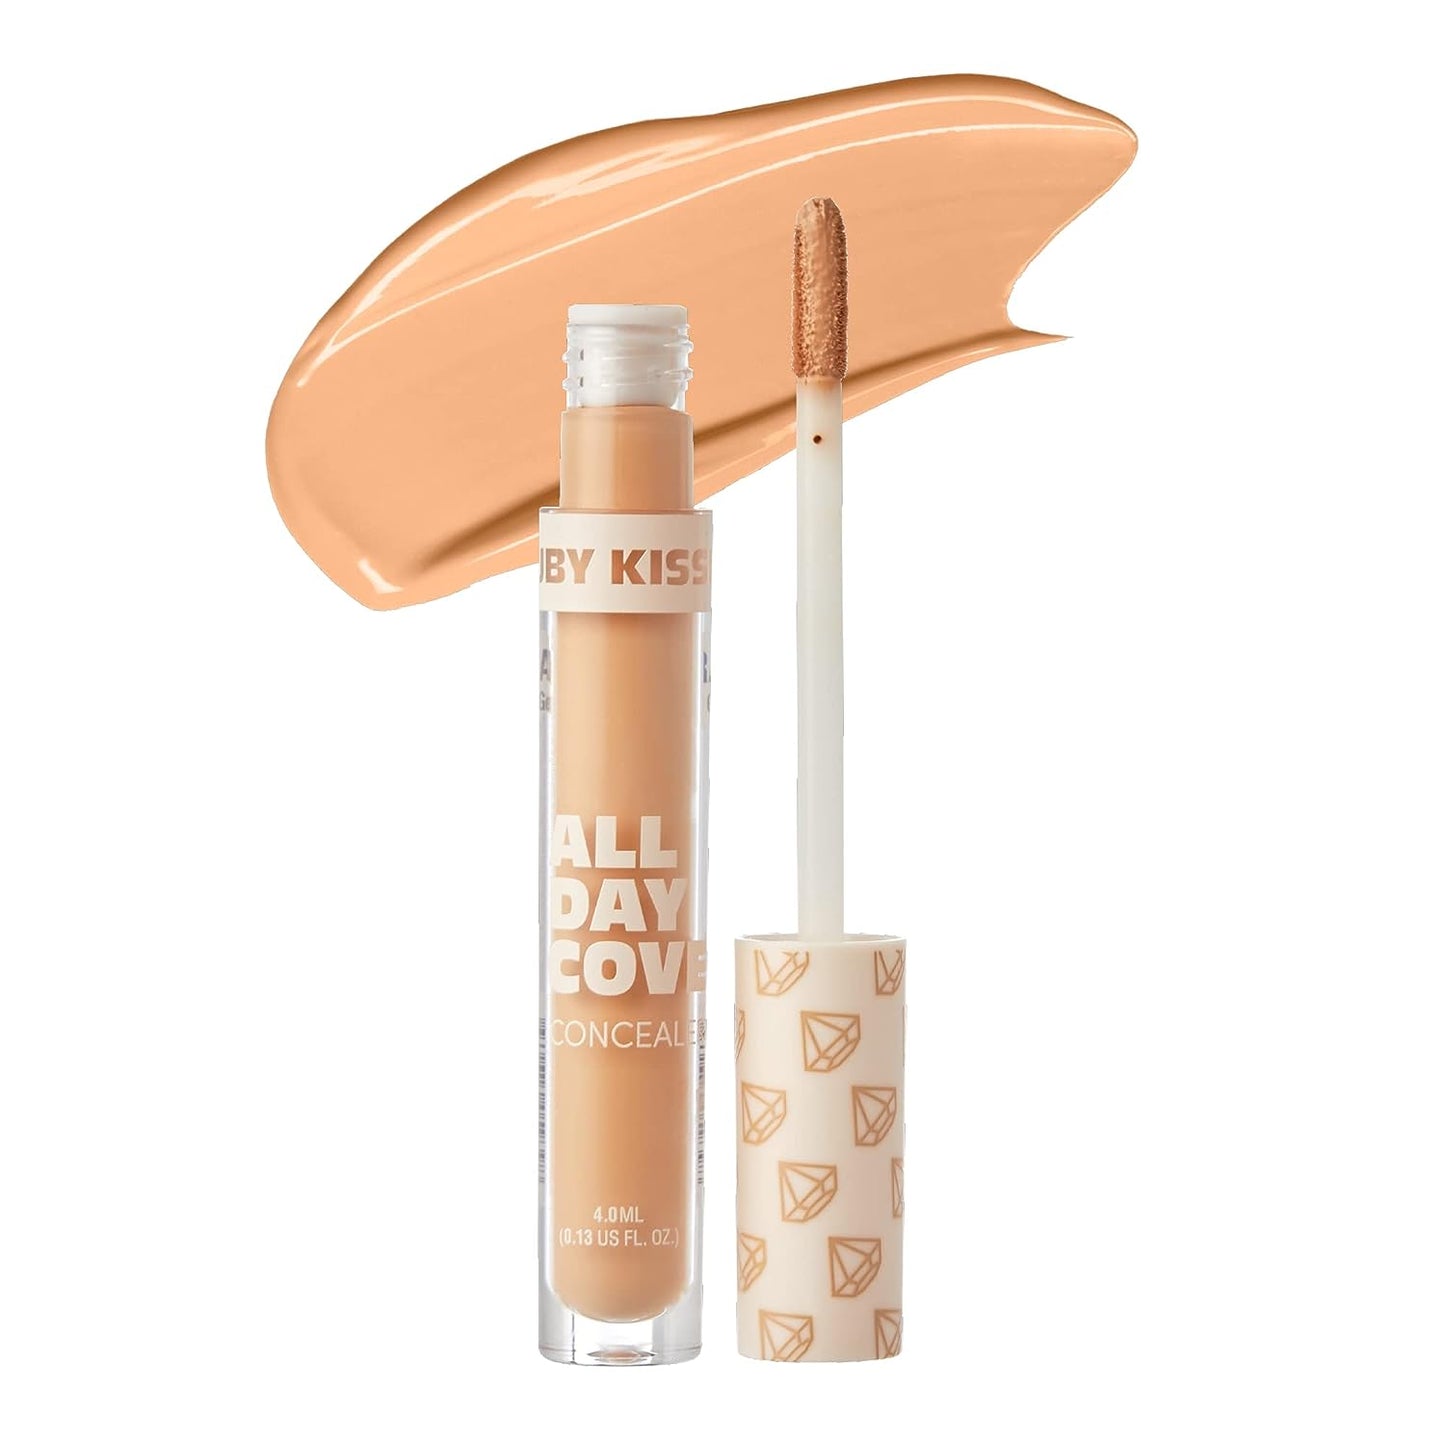 Ruby Kisses All Day Concealer RAC